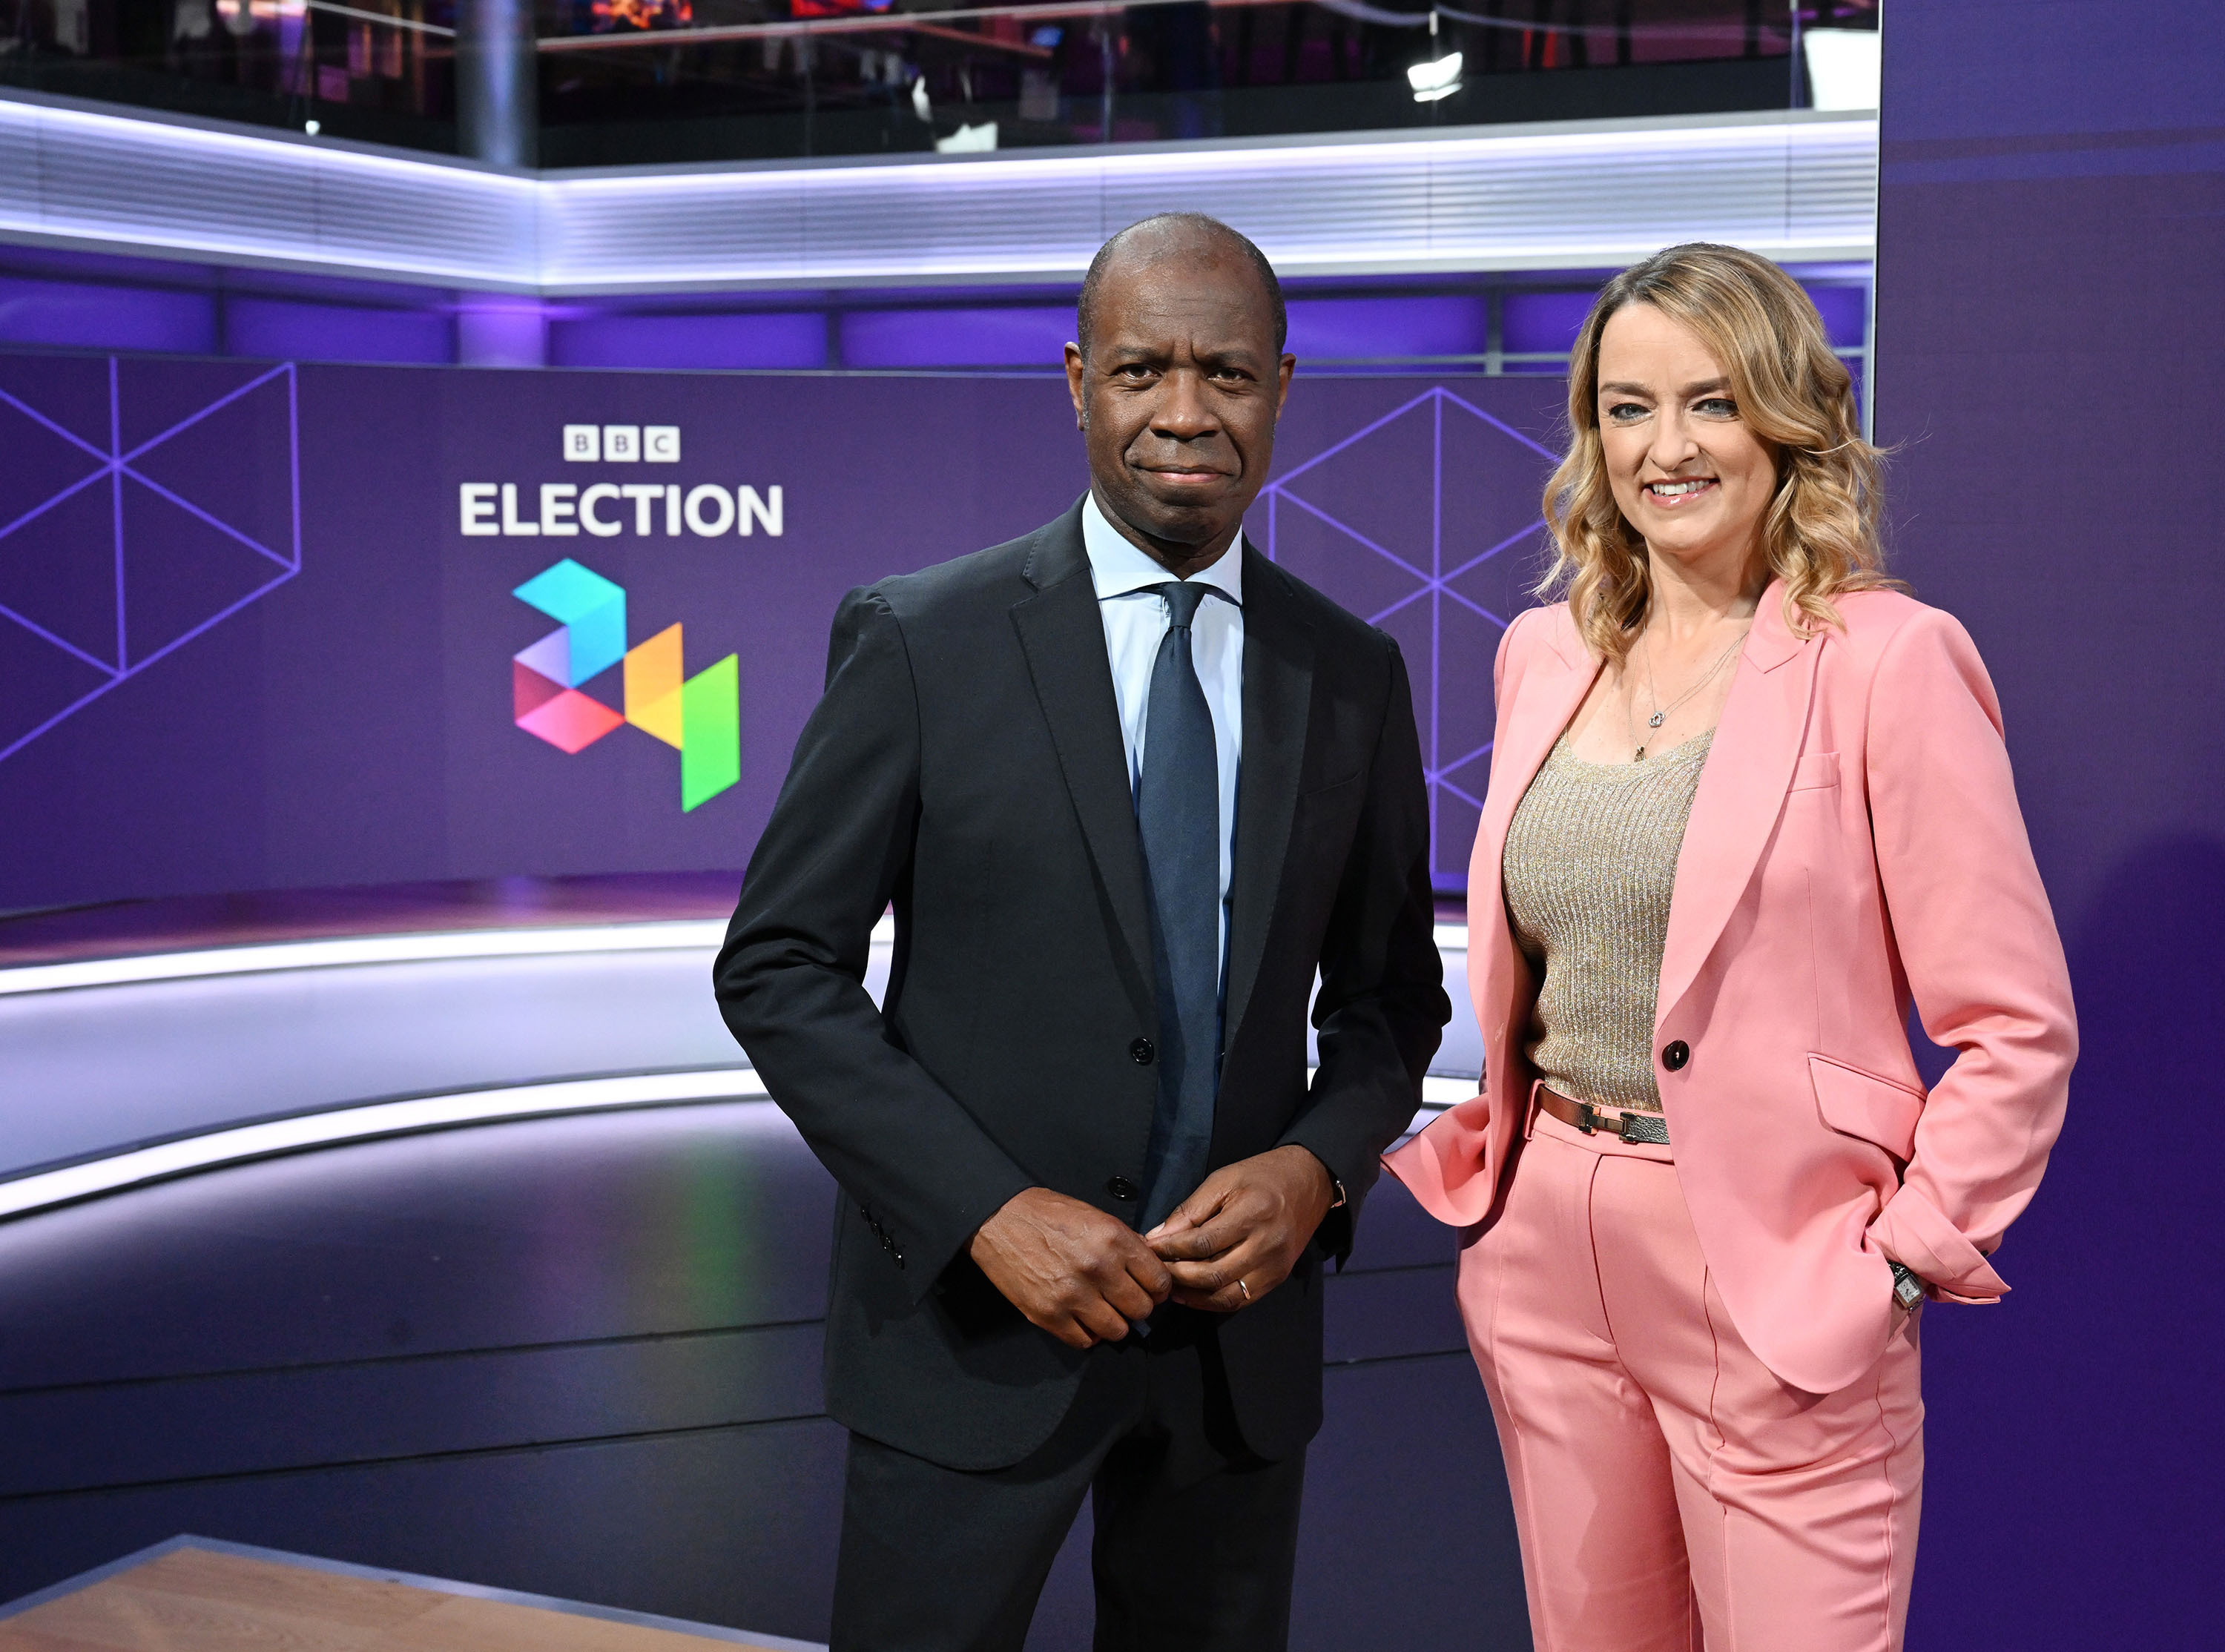 Clive Myrie and Laura Kuenssberg standing in a BBC News election studio